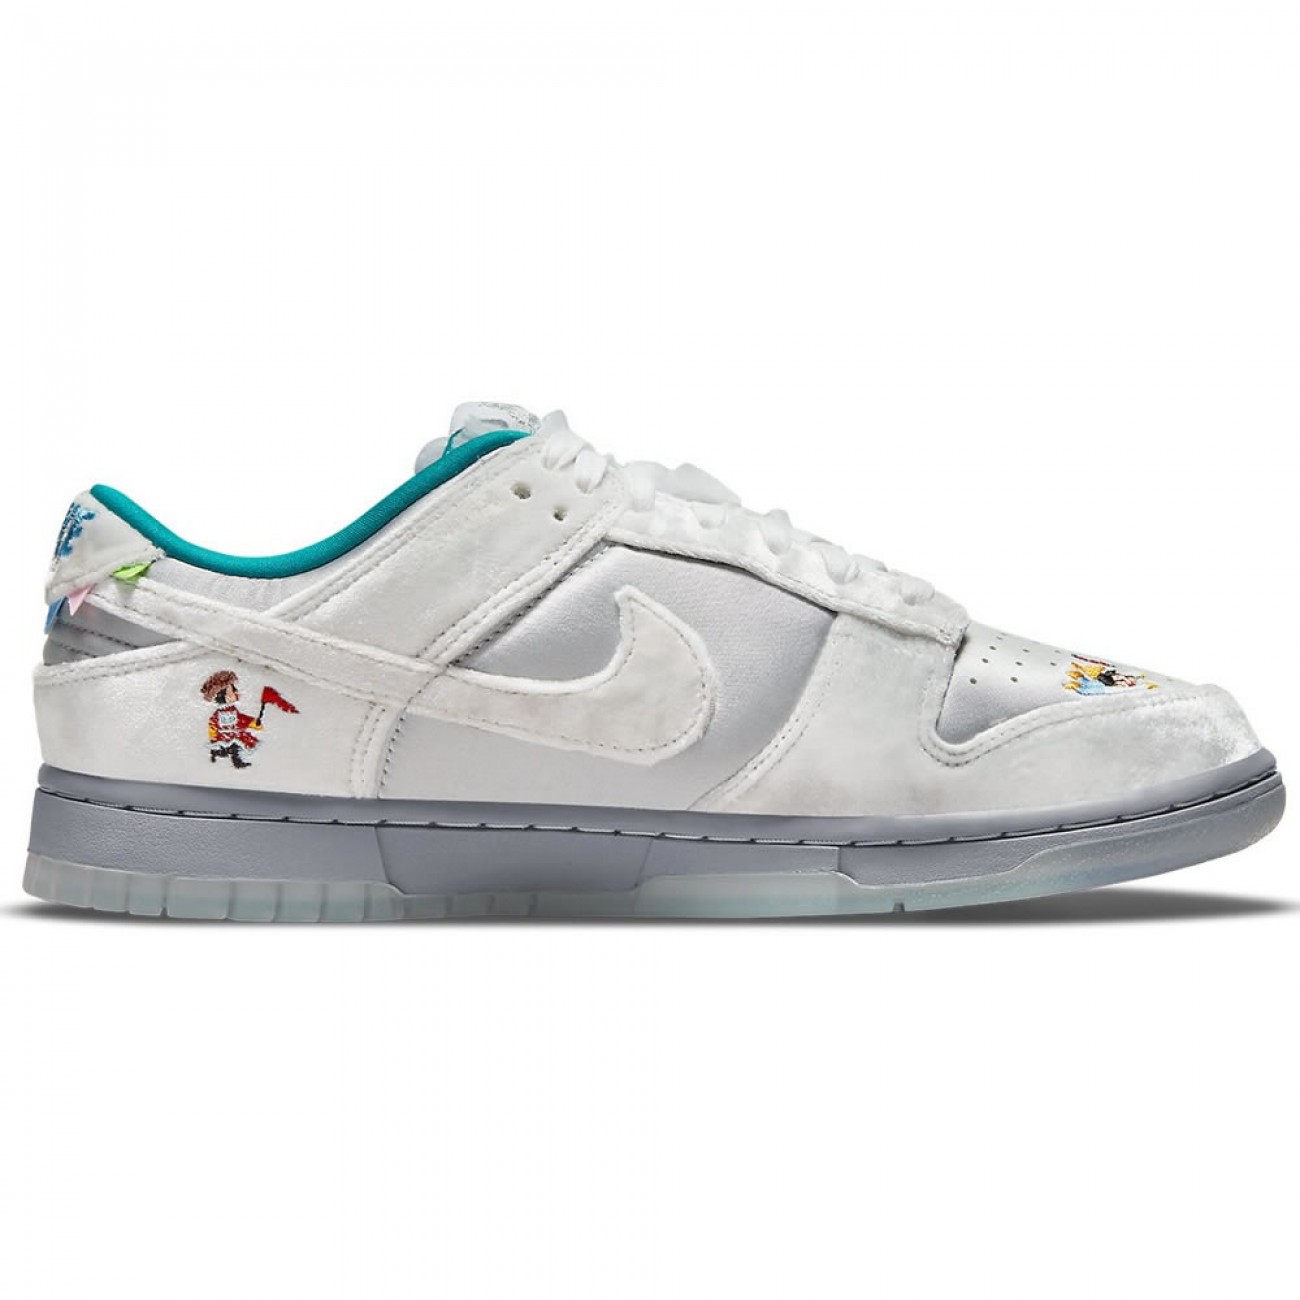 Nike Dunk Low "ICE" White/Silver-Blue DO2326-001